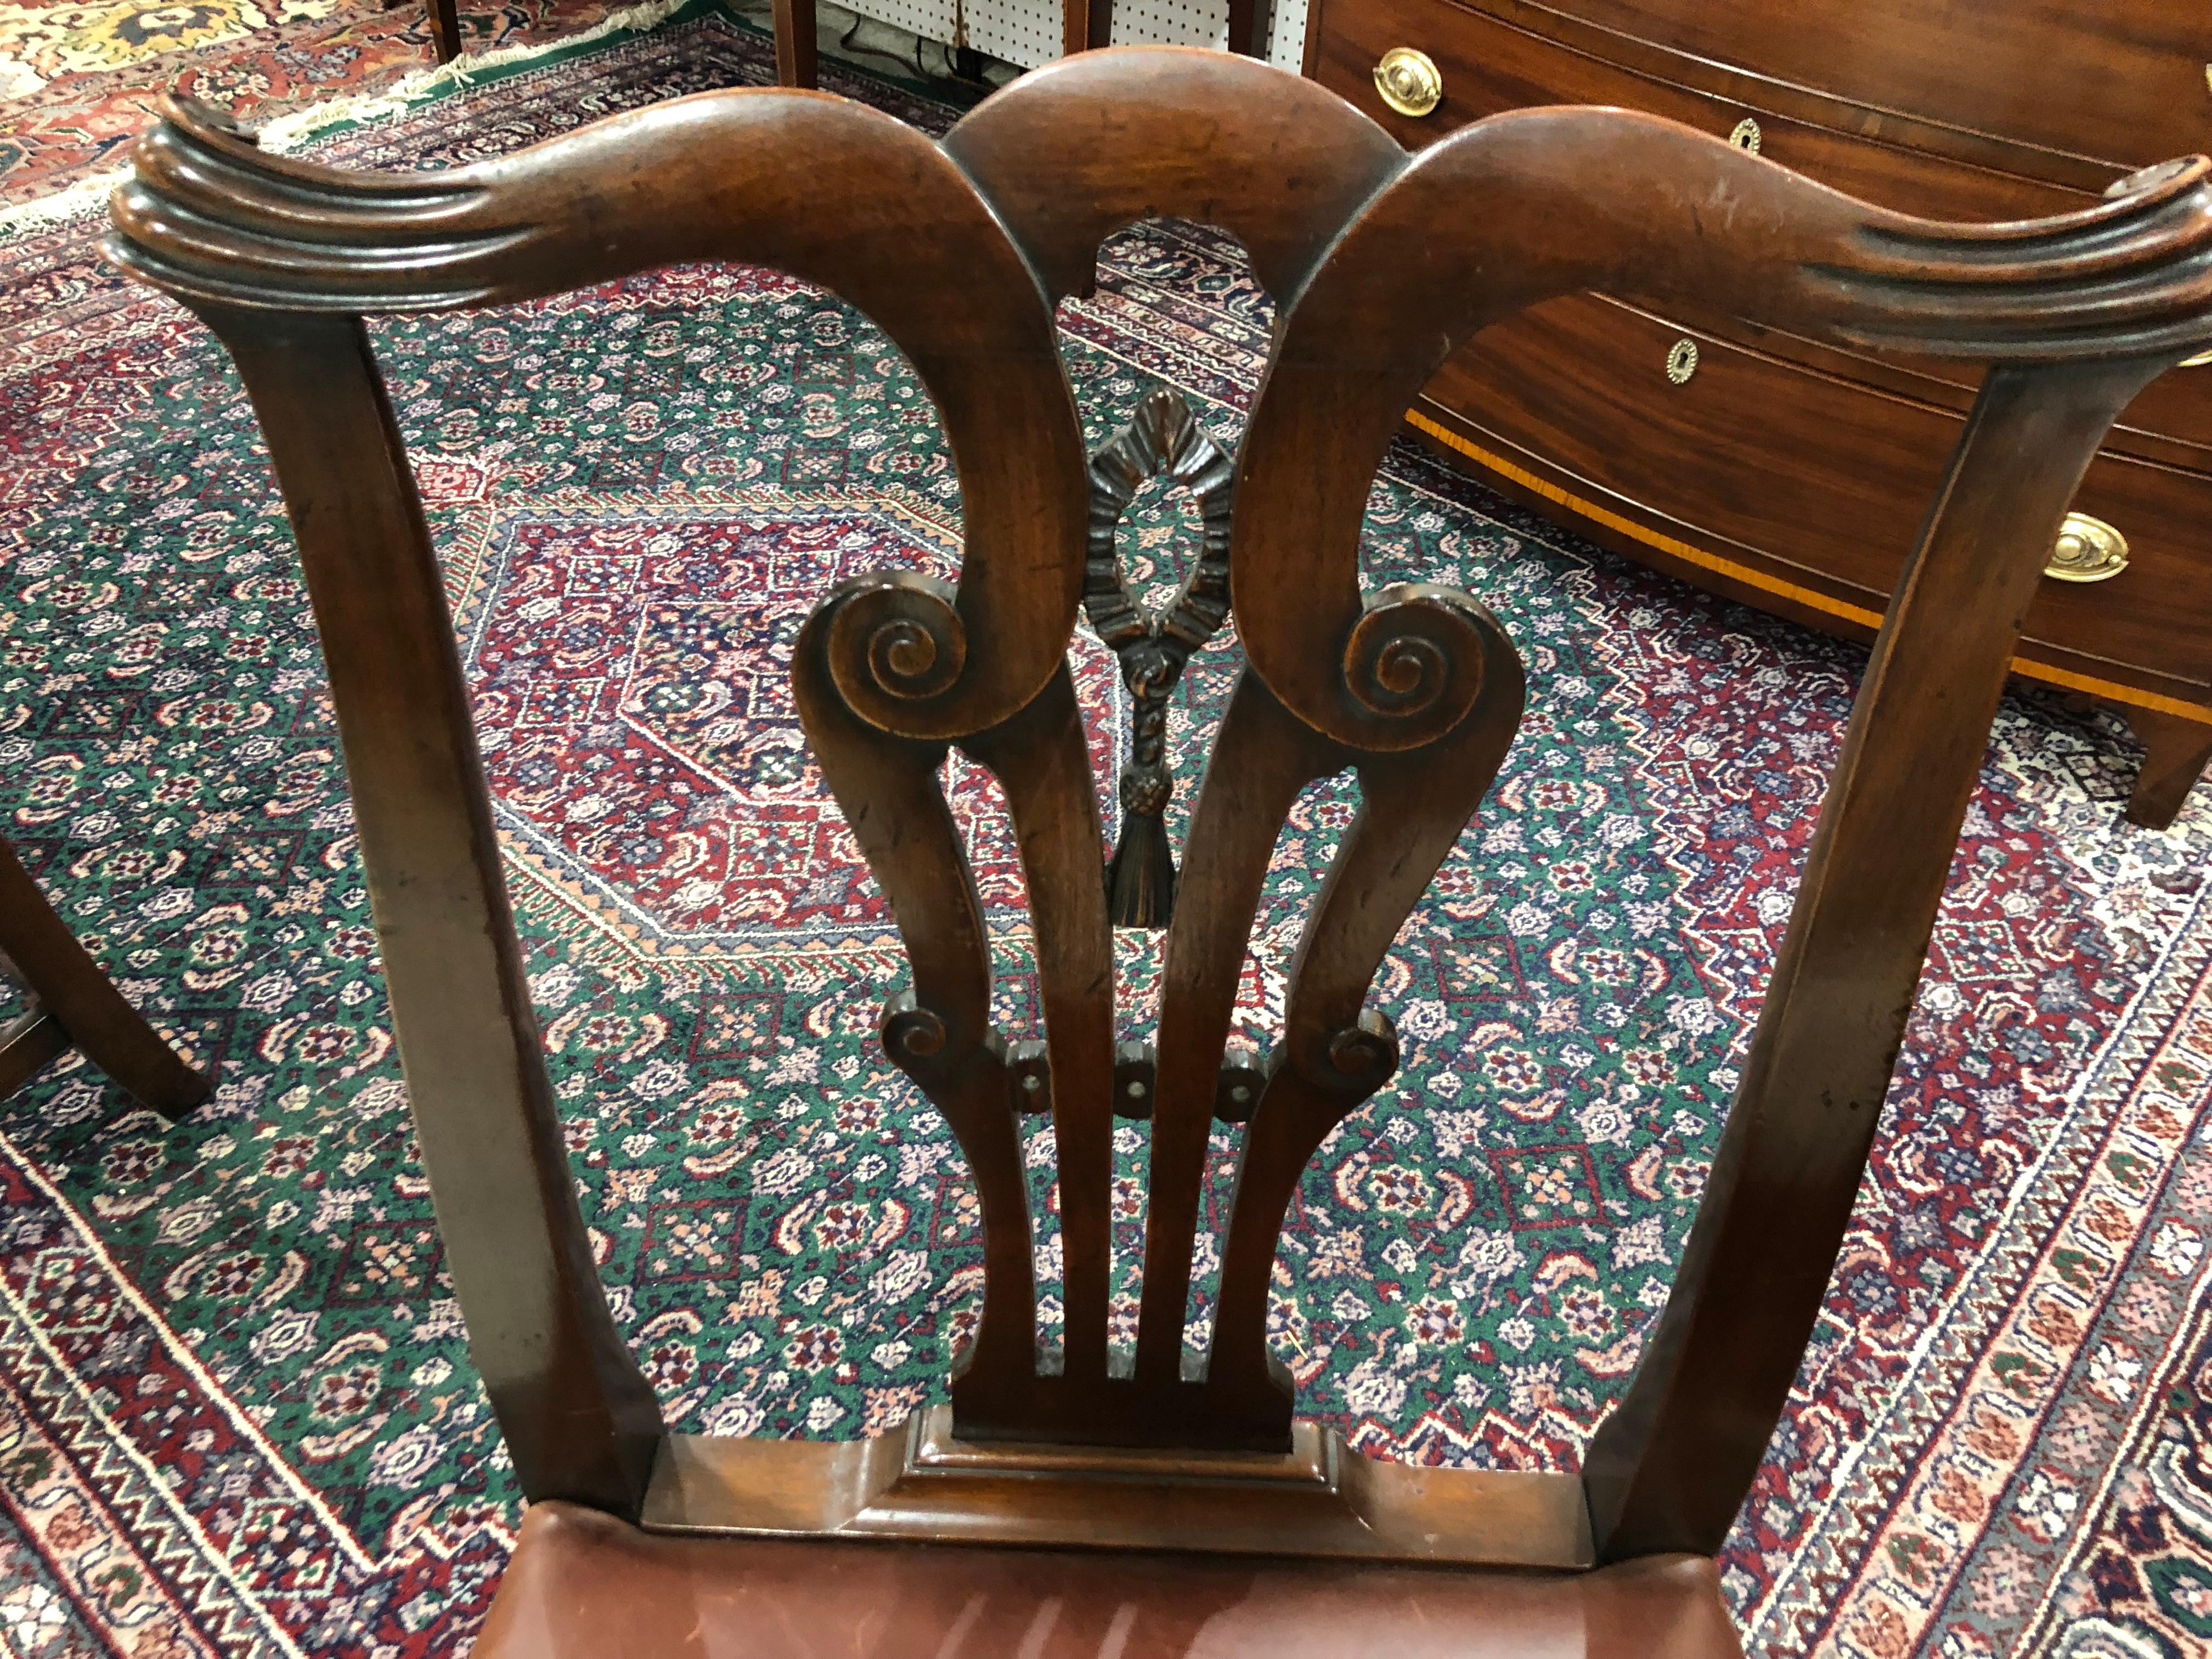 Set of 8 solid mahogany dining chairs, Chippendale style, 20th century, brown leather seats, 2 arms and 6 sides, very sturdy and strong, stretchers.